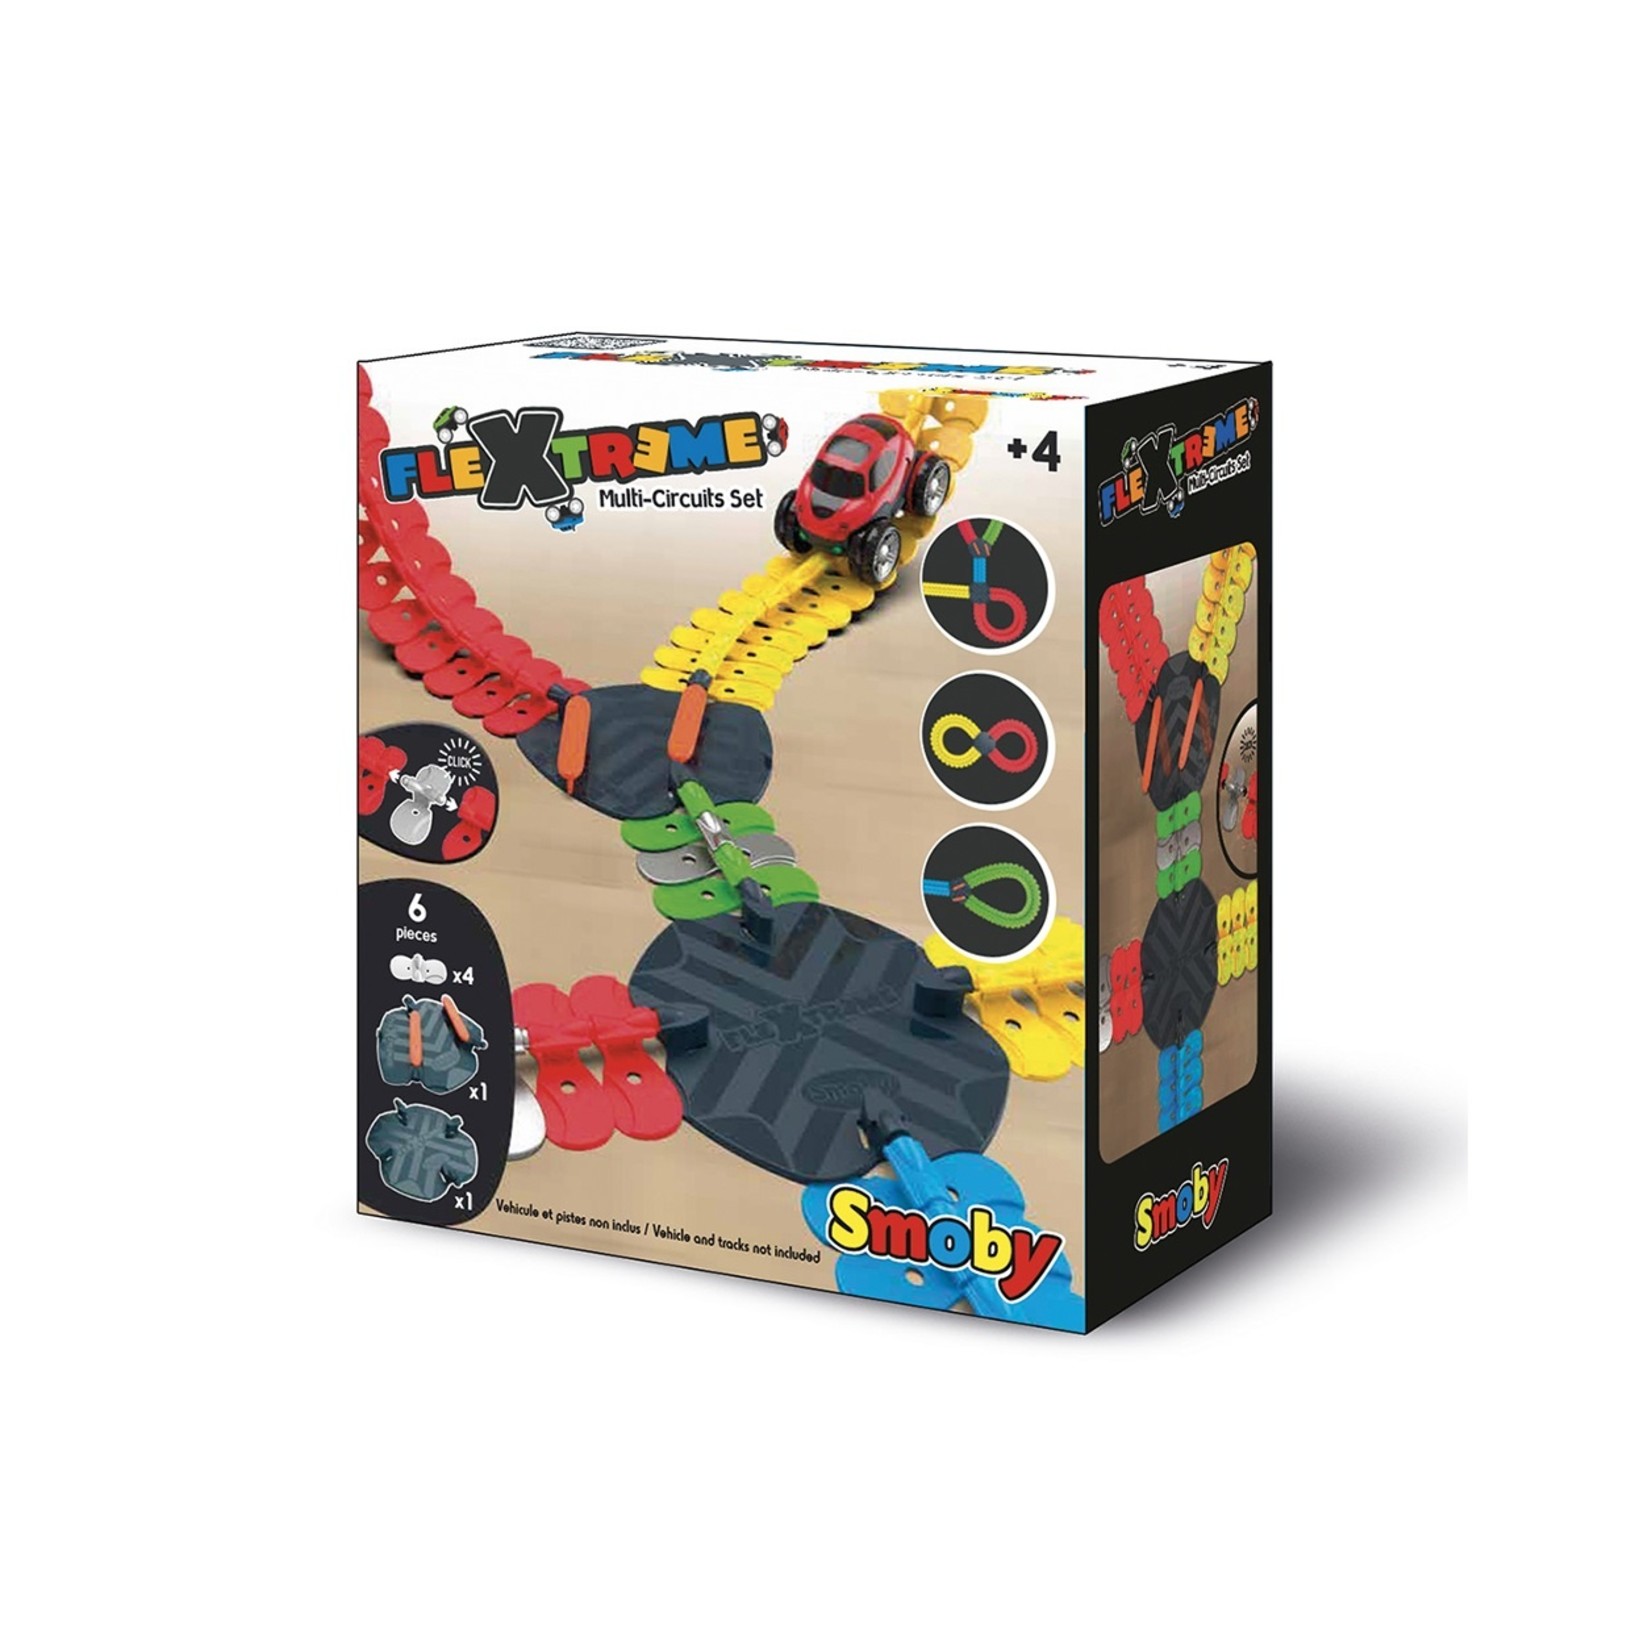 Smoby FleXtreme - Extension Multi-circuits